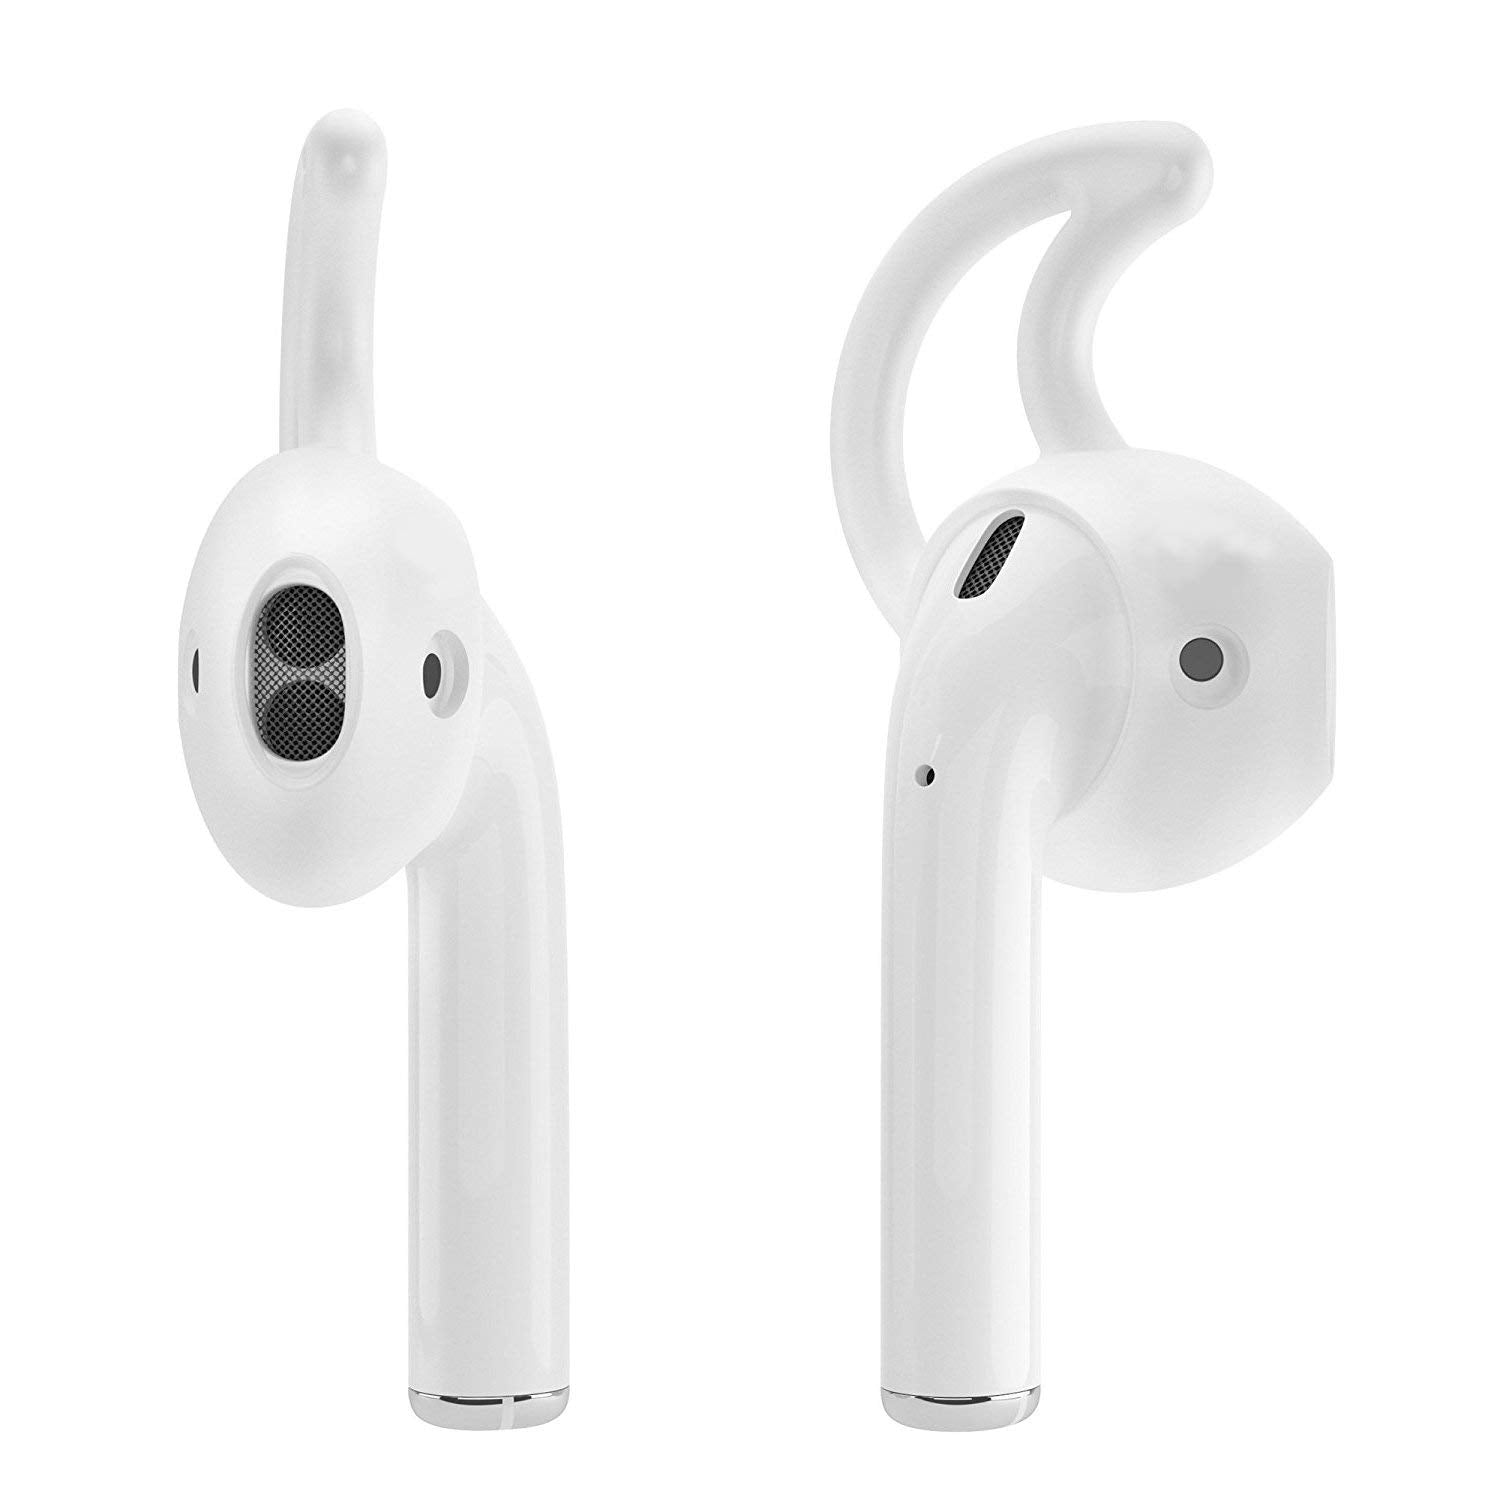 NatoGears Airpods Ear Hook - Airpod Covers Air Pods Ear Hooks 3 Pairs